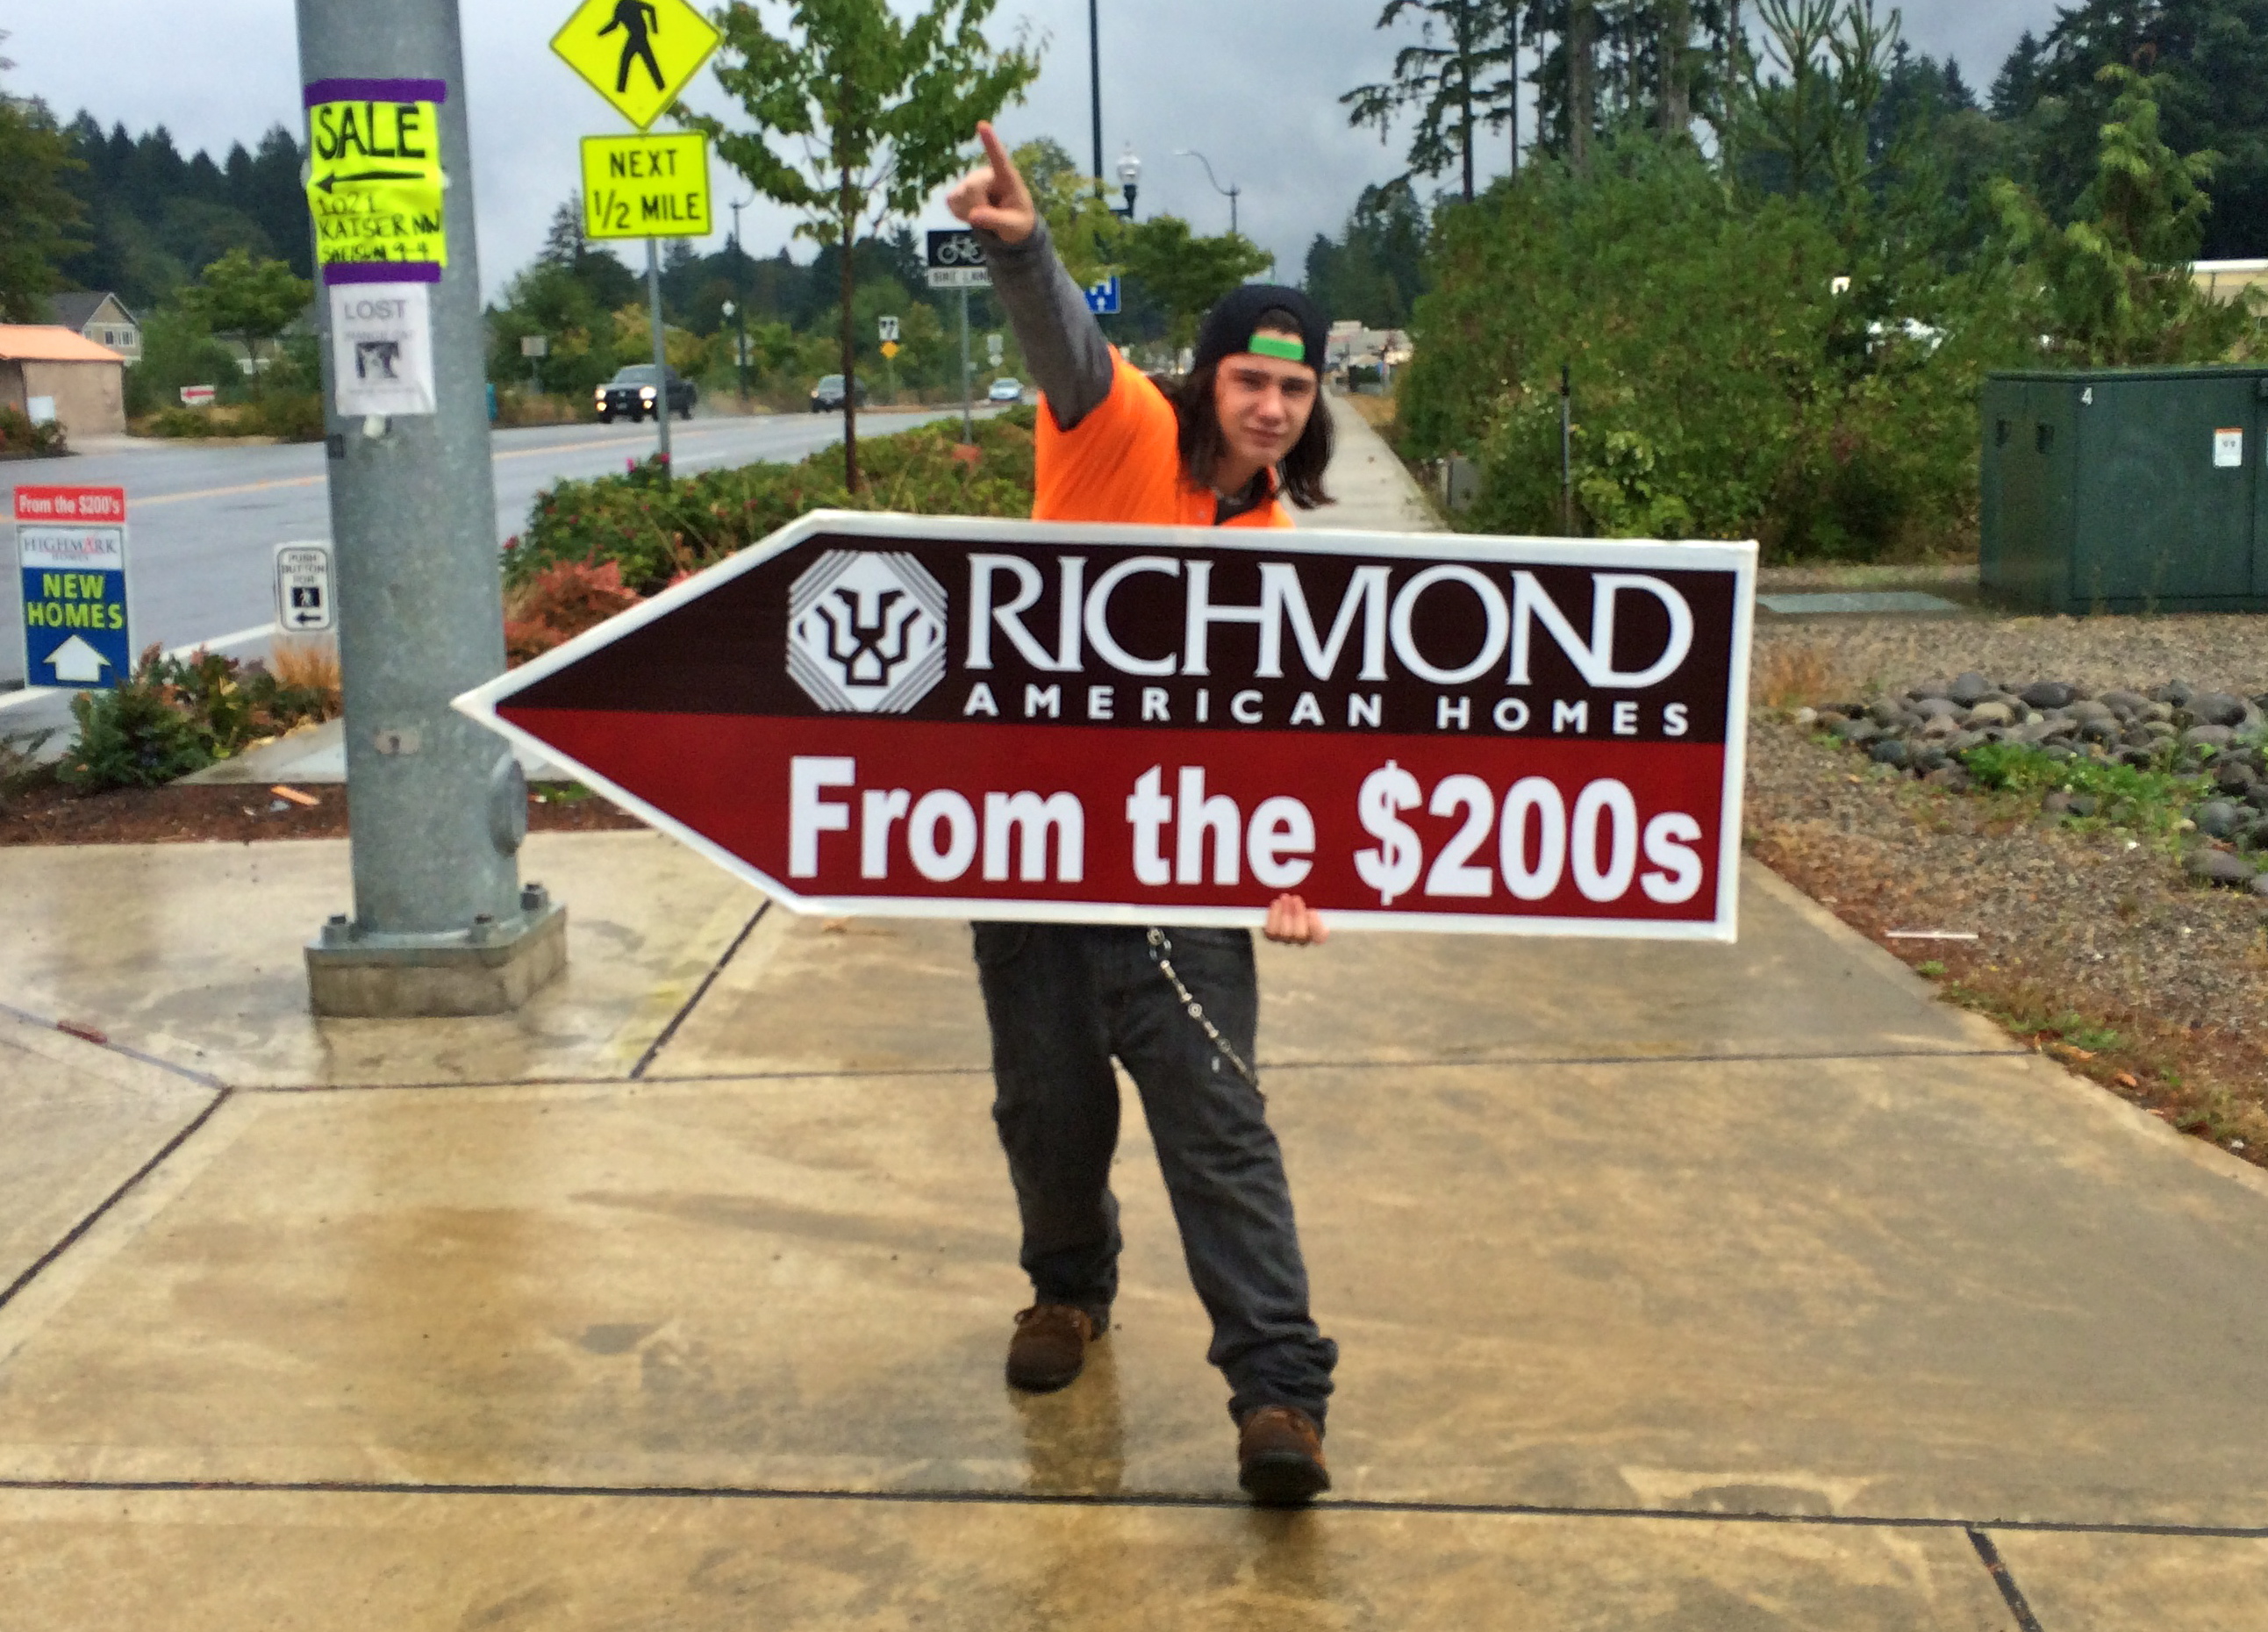 Best Sign Spinner and Sign Spinners in Tacoma |Seattle | Portland | Los Angeles | Bellevue | Santa Monica  .JPG